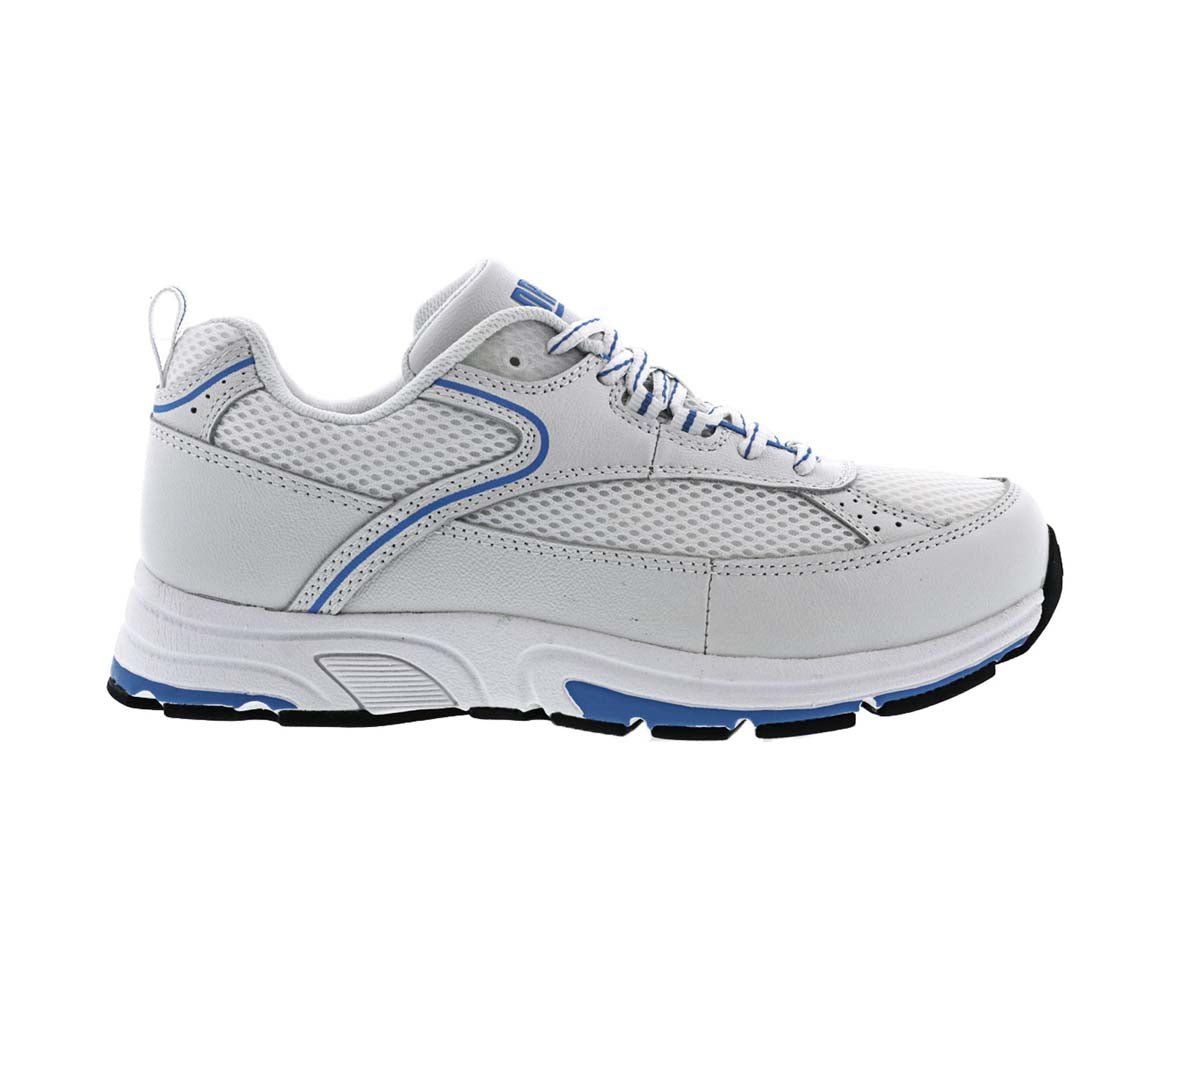 DREW ATHENA WOMEN’S ATHLETIC SHOES IN WHITE/BLUE COMBO - TLW Shoes